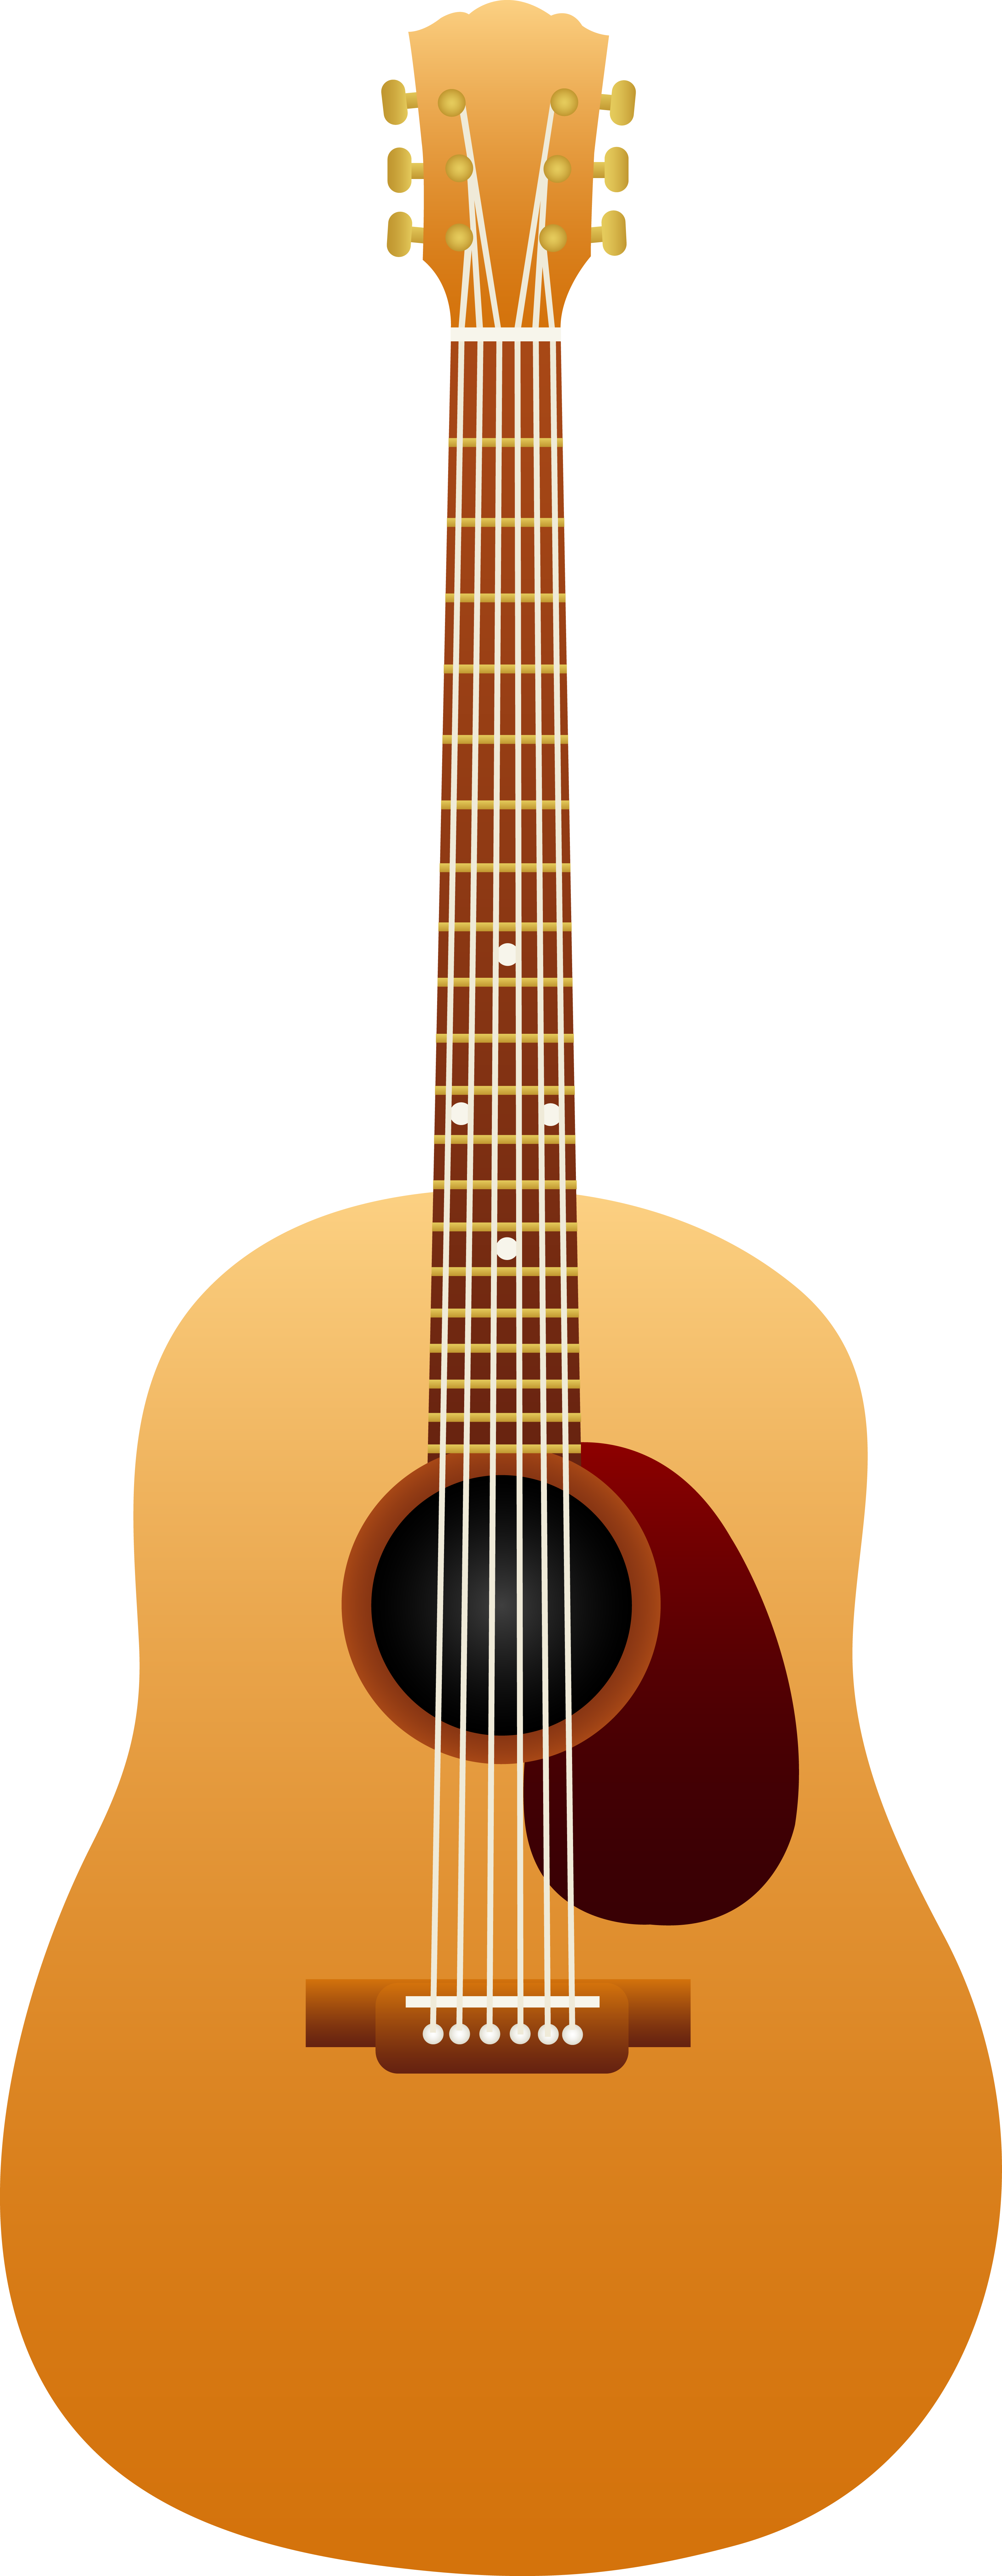 Guitar Clip Art Free | Clipart library - Free Clipart Images